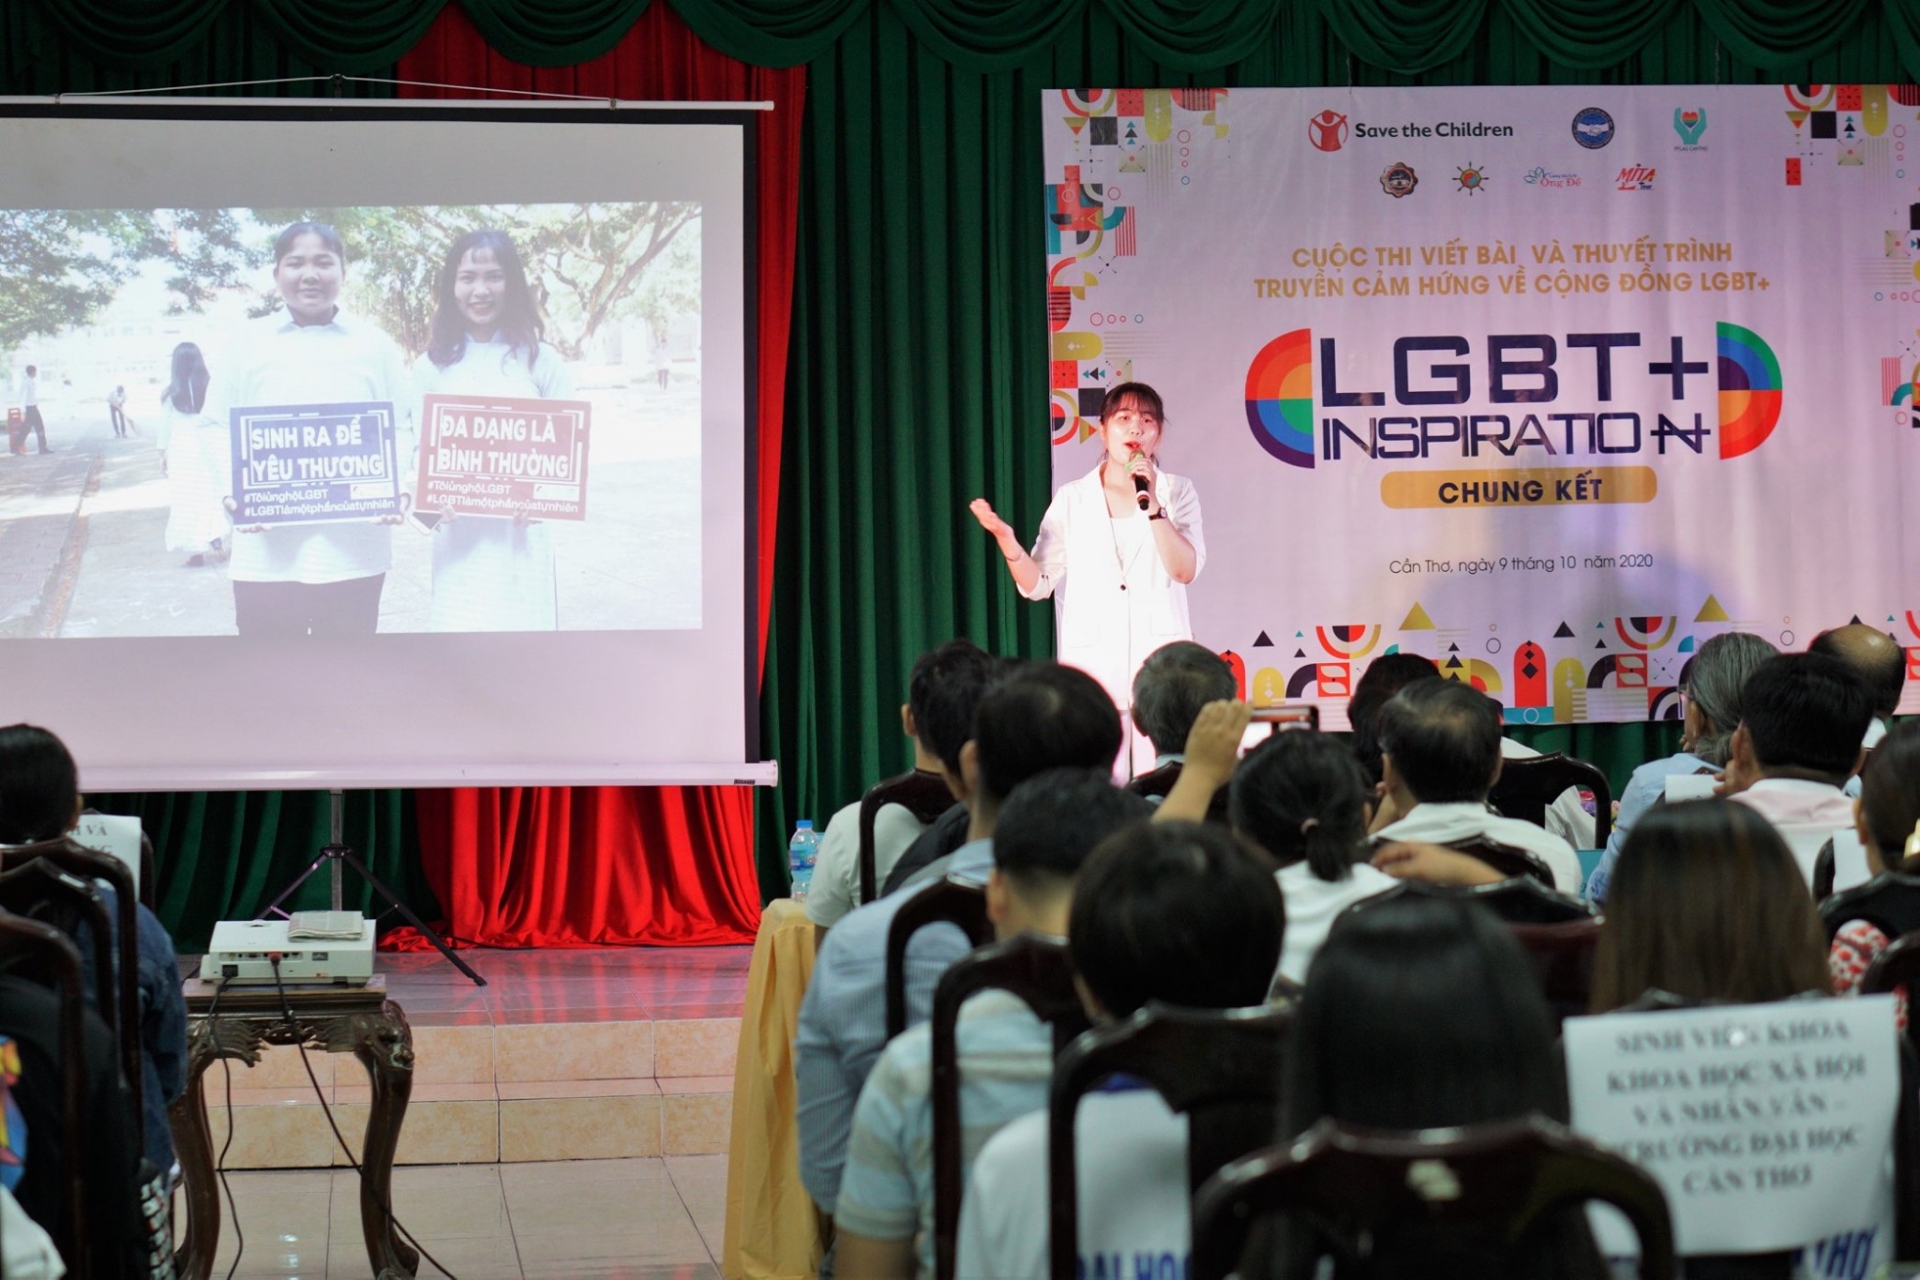 for the first time contest inspiring learn about lgbt community organized in can tho